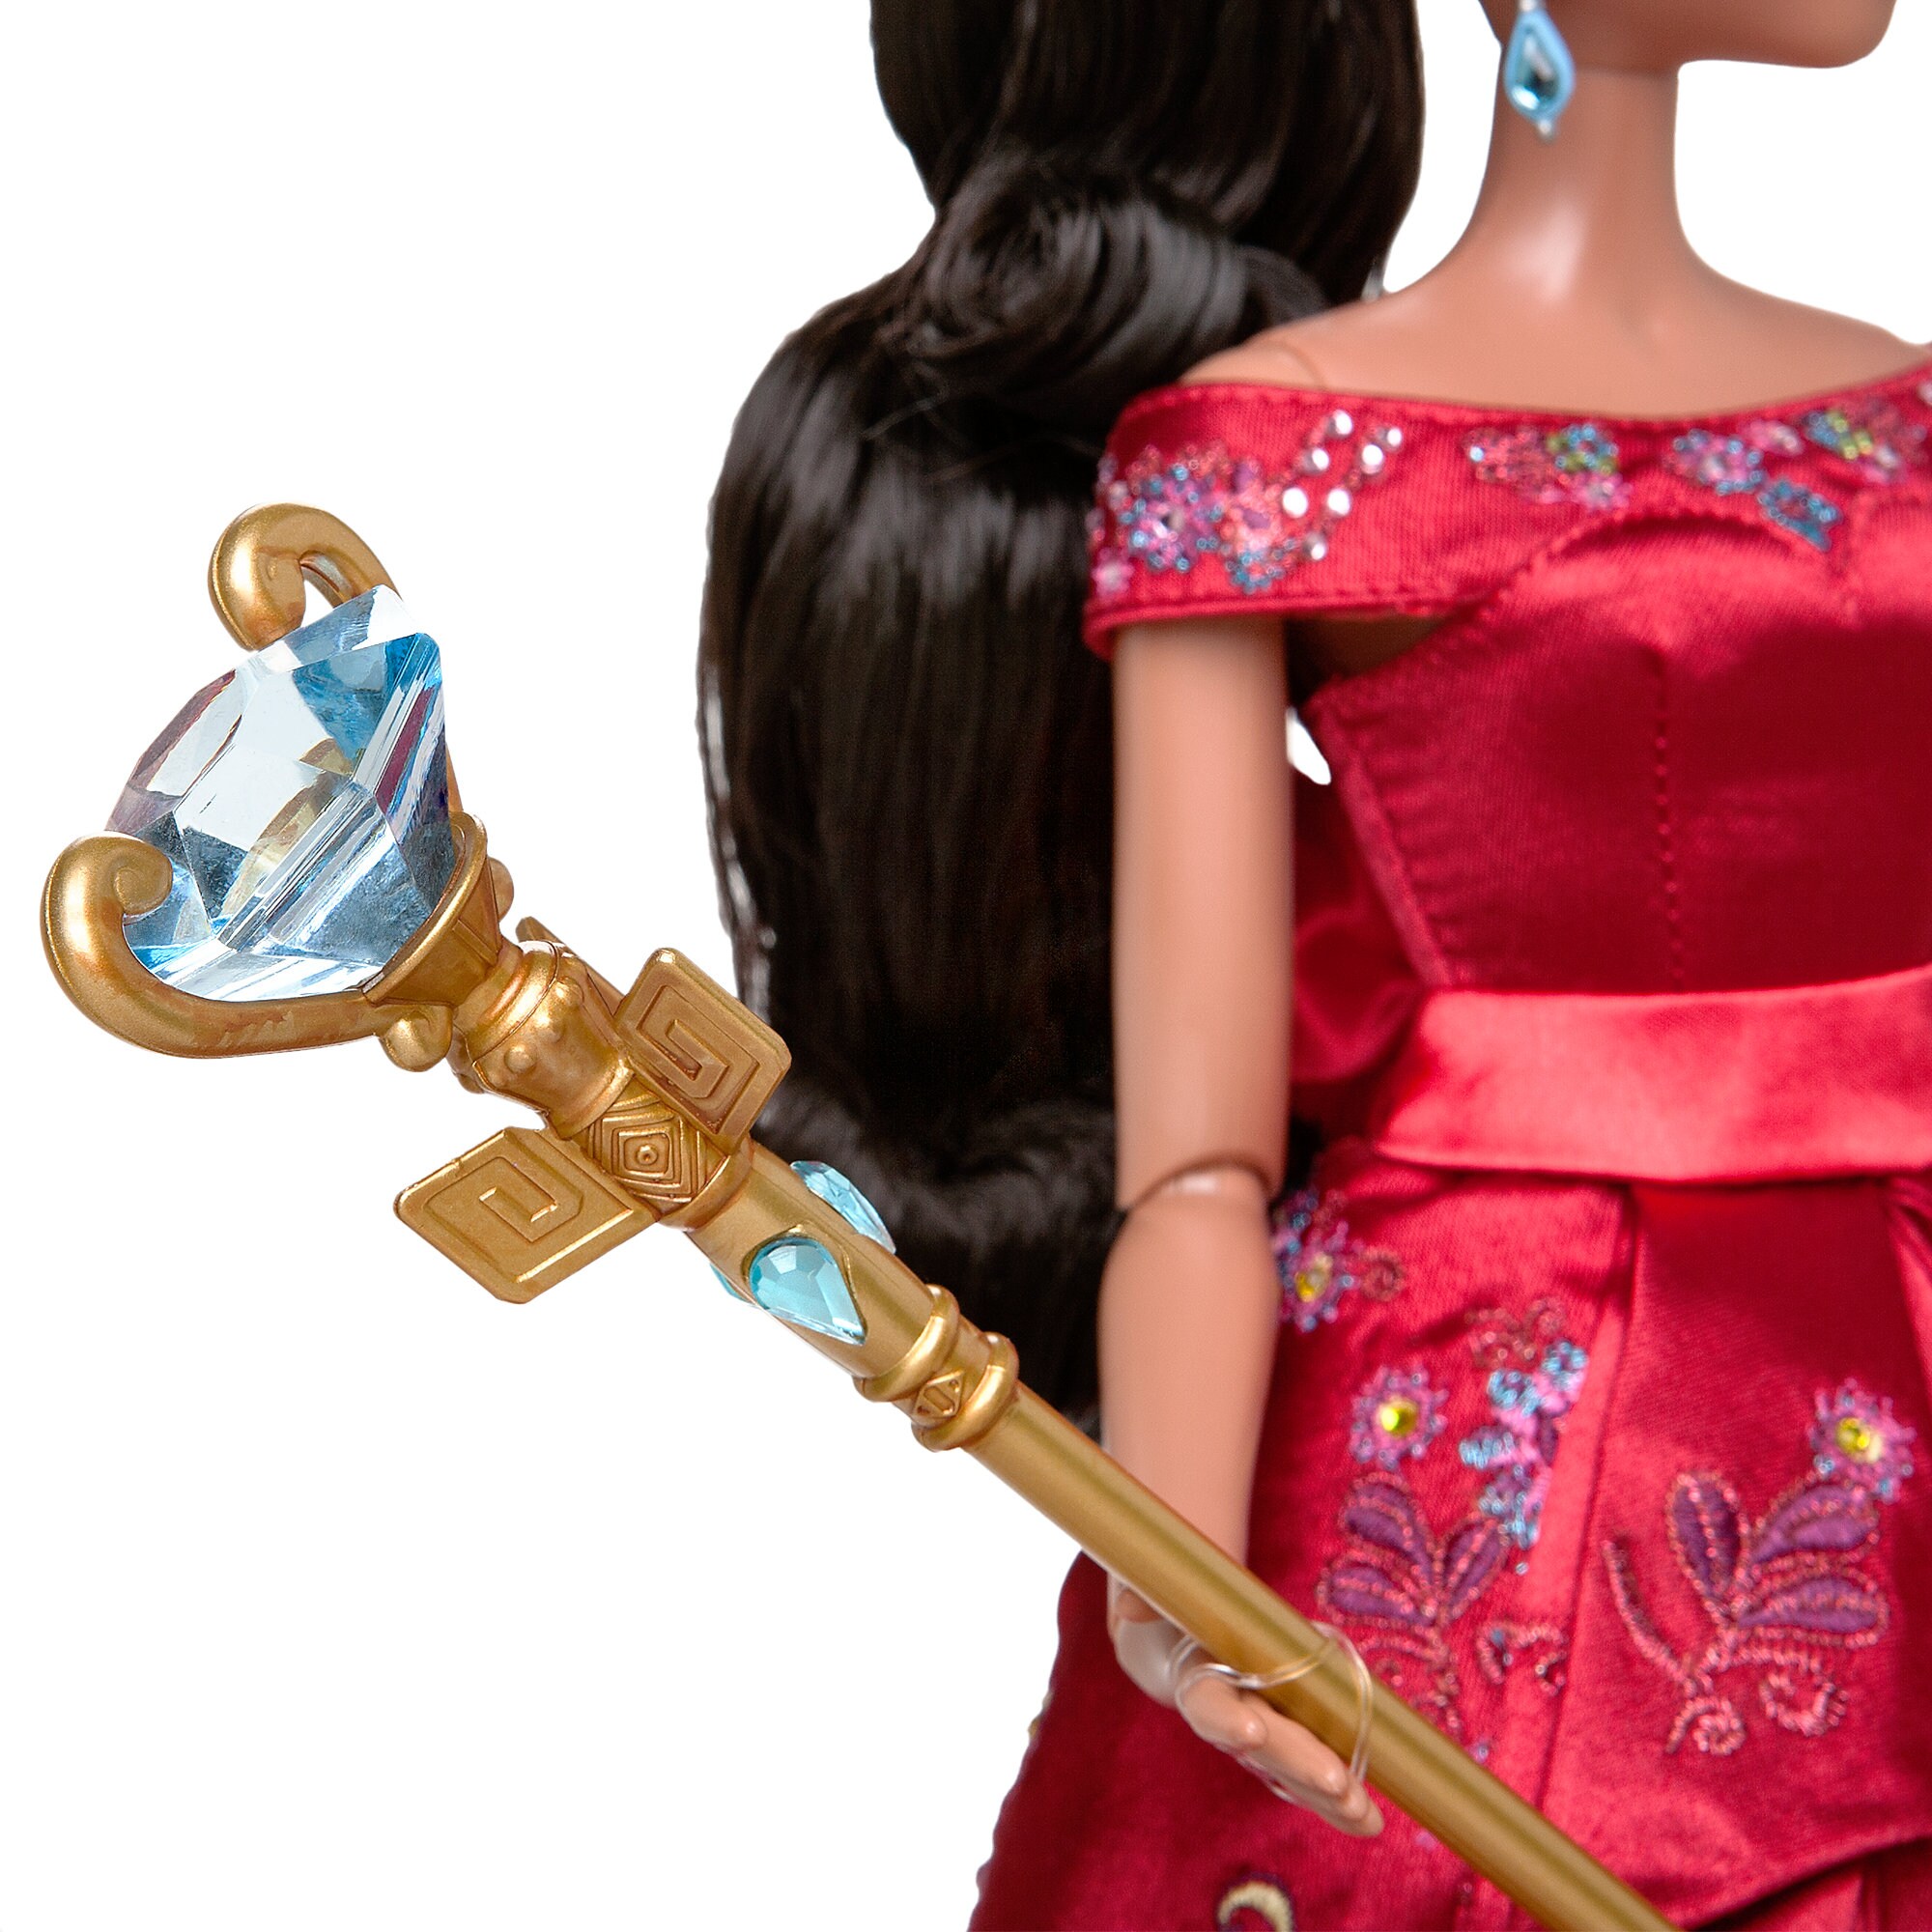 Elena of Avalor Doll - Limited Edition